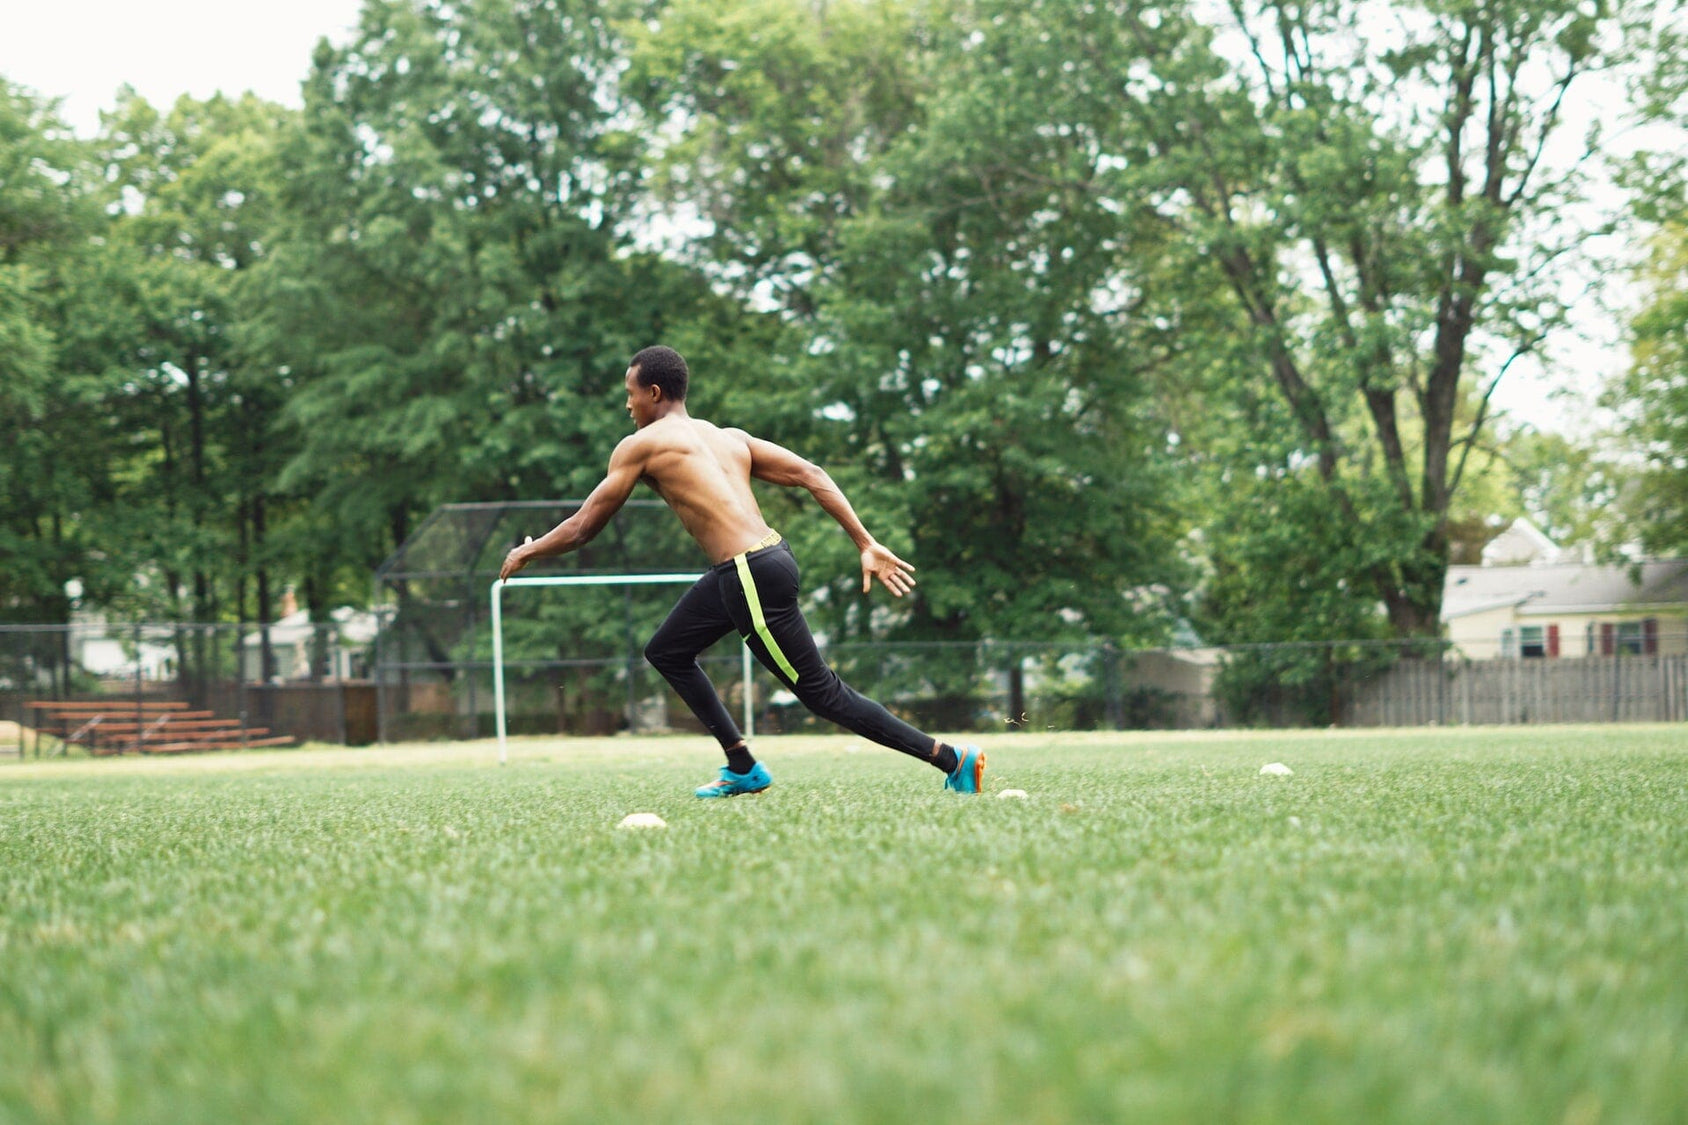 How To Run Faster: 7 Expert Training Exercises To Increase Your Speed